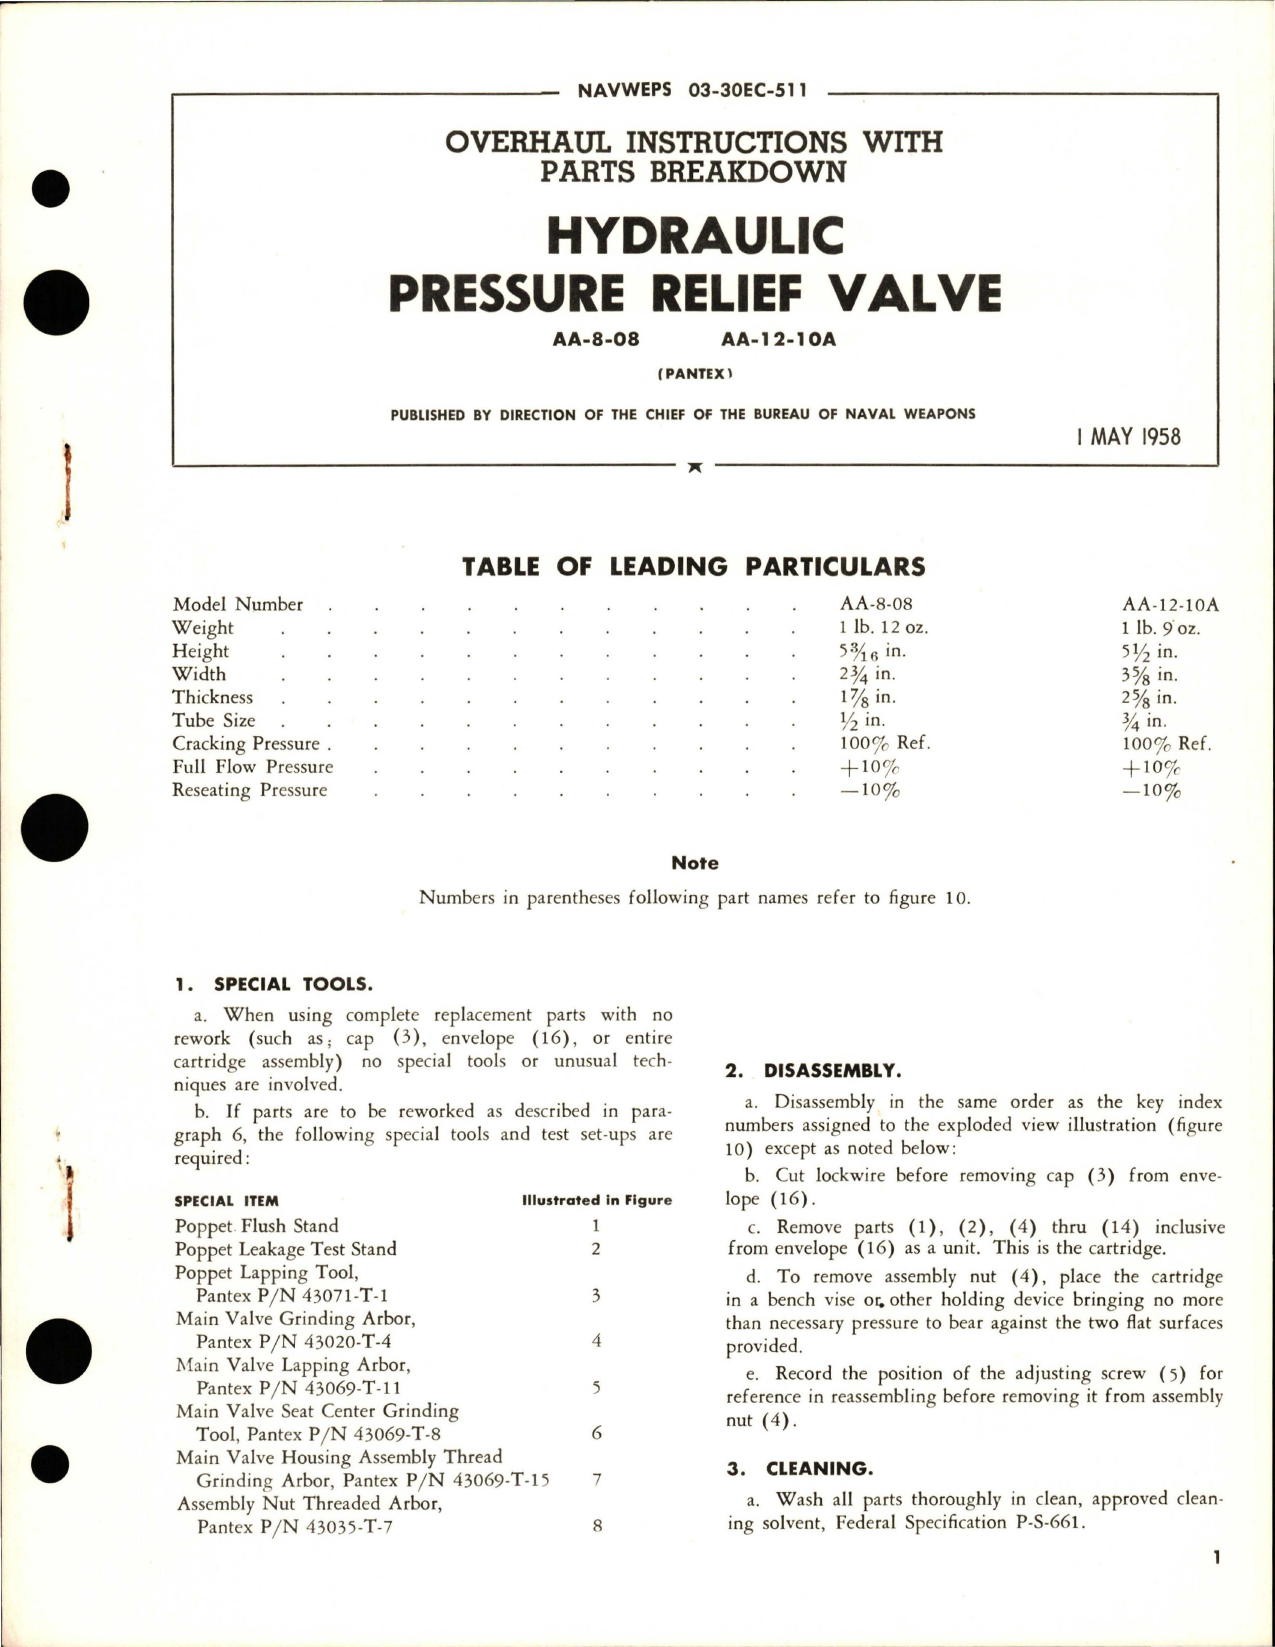 Sample page 1 from AirCorps Library document: Overhaul Instructions with Parts Breakdown for Hydraulic Pressure Relief Valve - AA-8-08 and AA-12-10A 